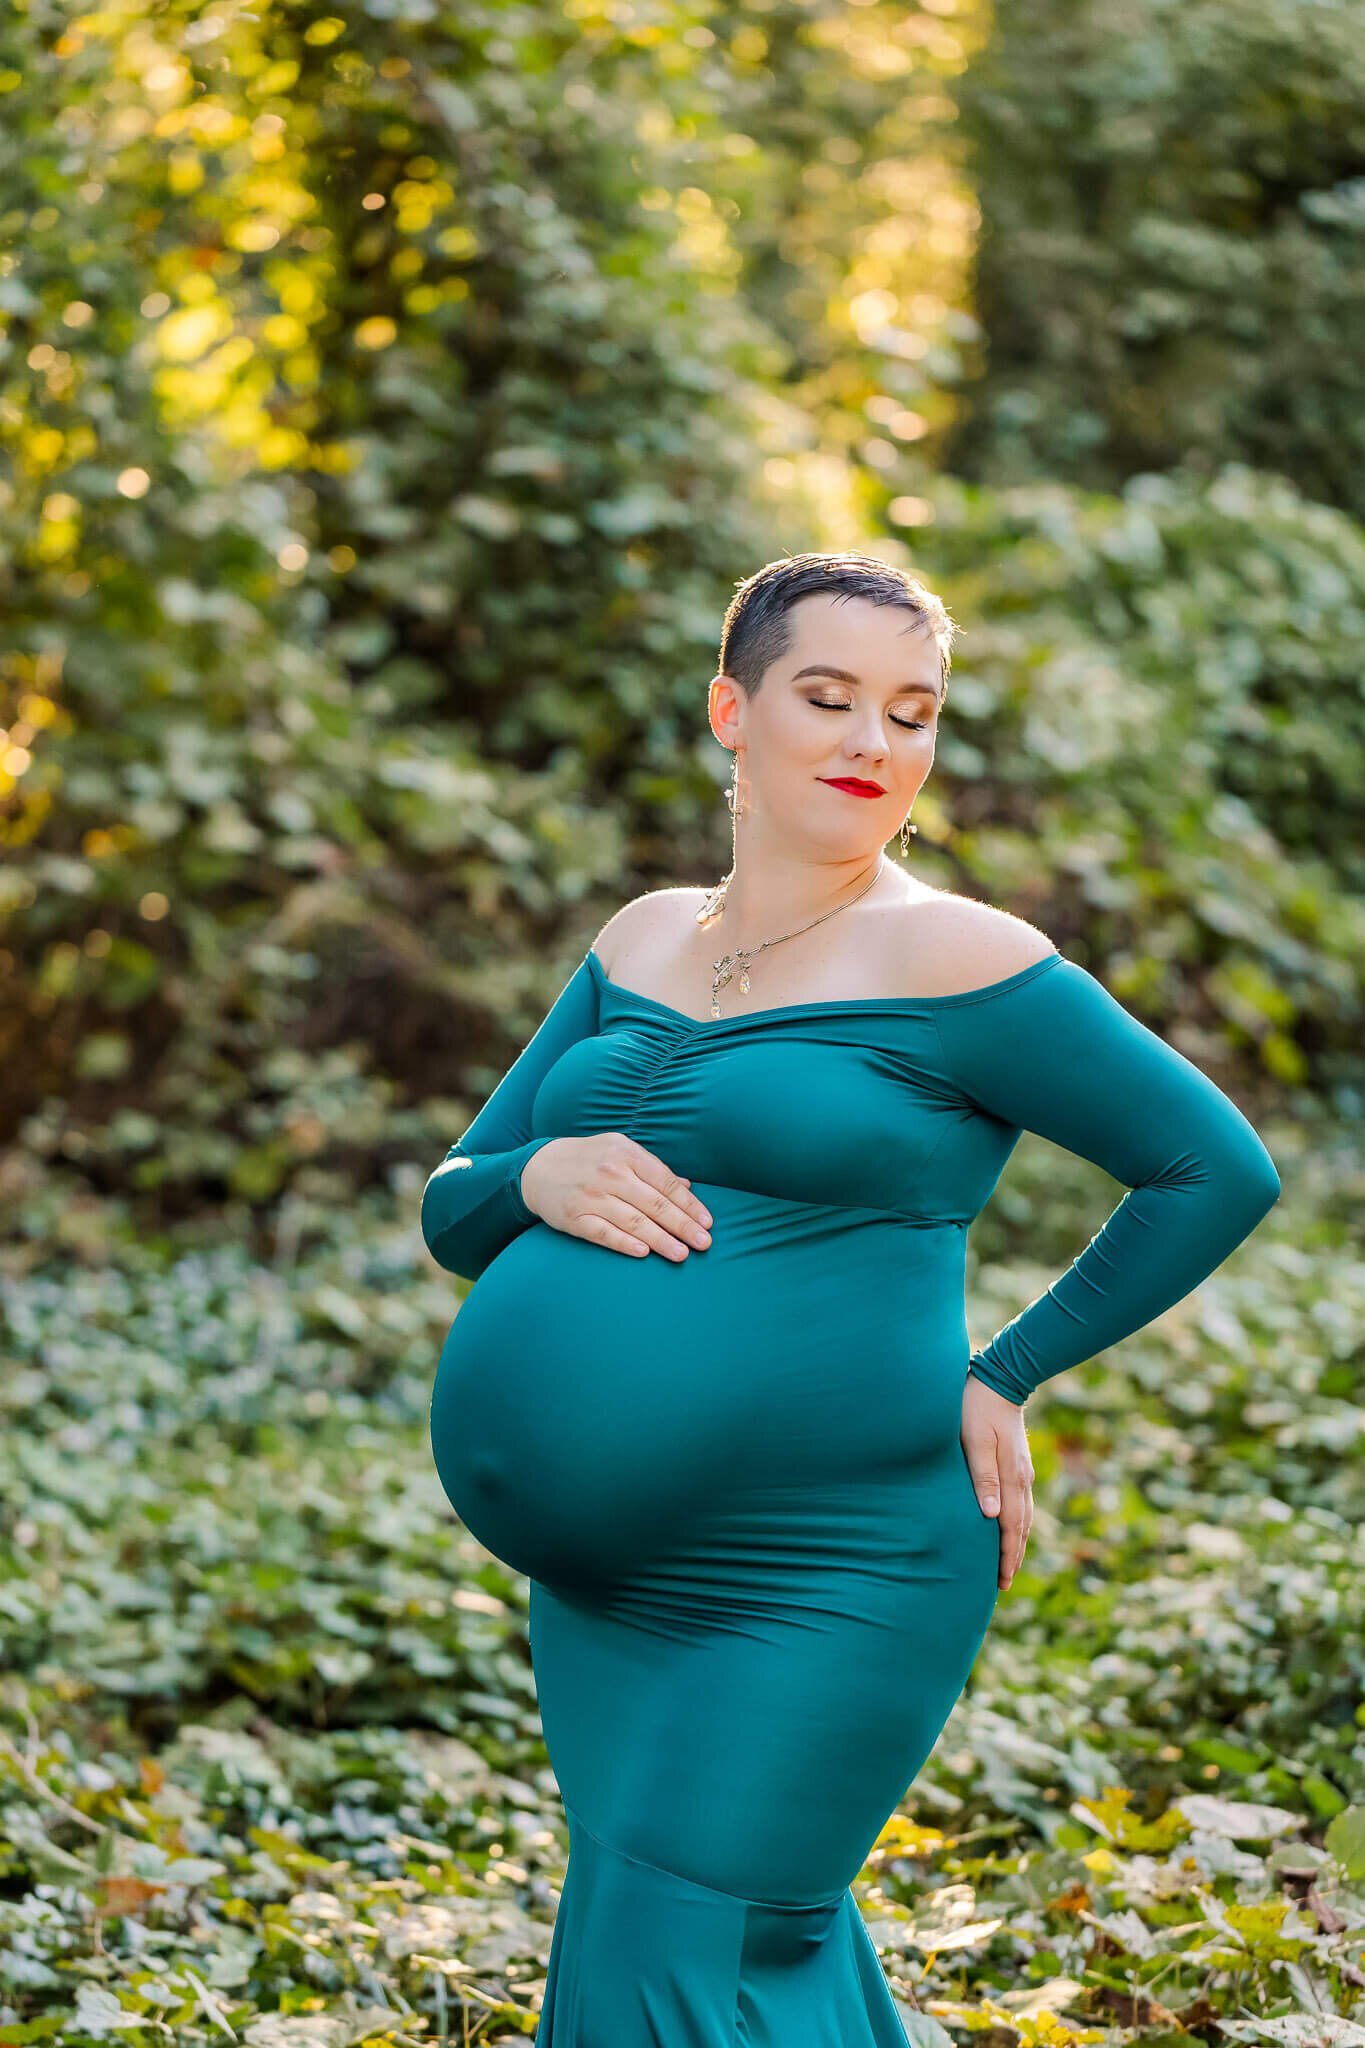 A mother-to-be posing in an Alexandria park wearing a teal dress.